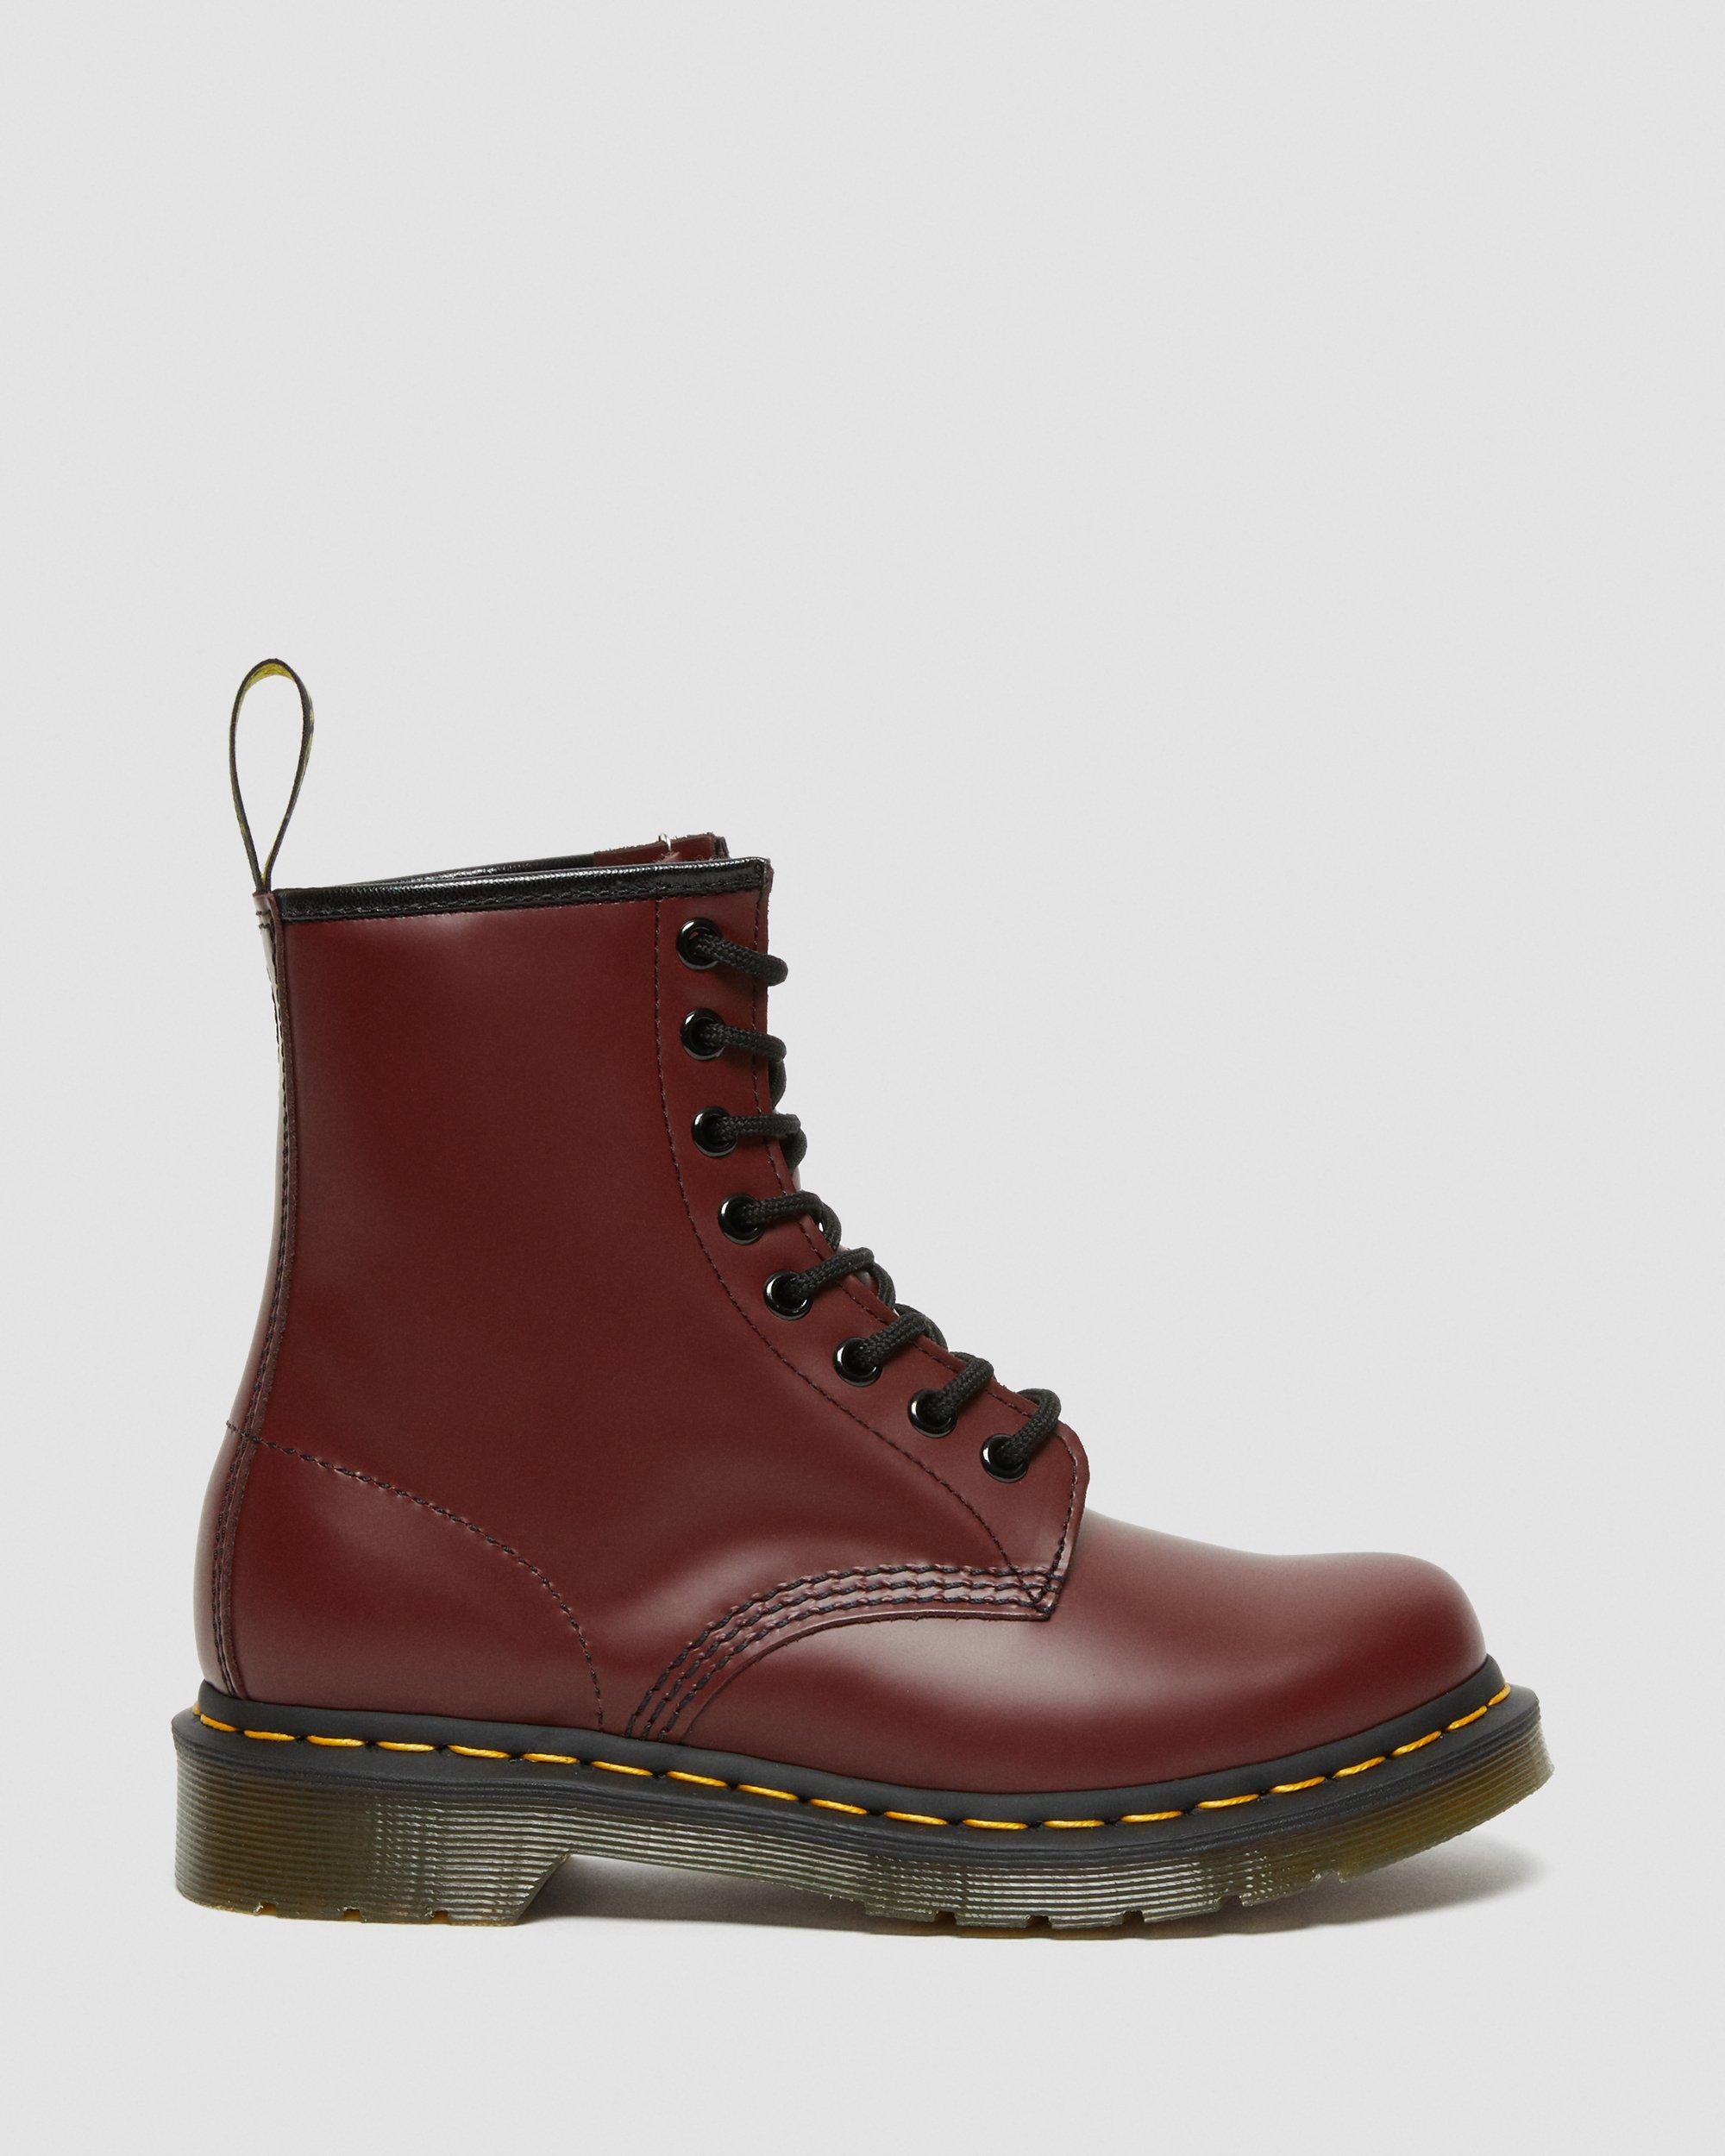 Voorzichtig Fonkeling Zuinig 1460 Women's Smooth Leather Lace Up Boots | Dr. Martens